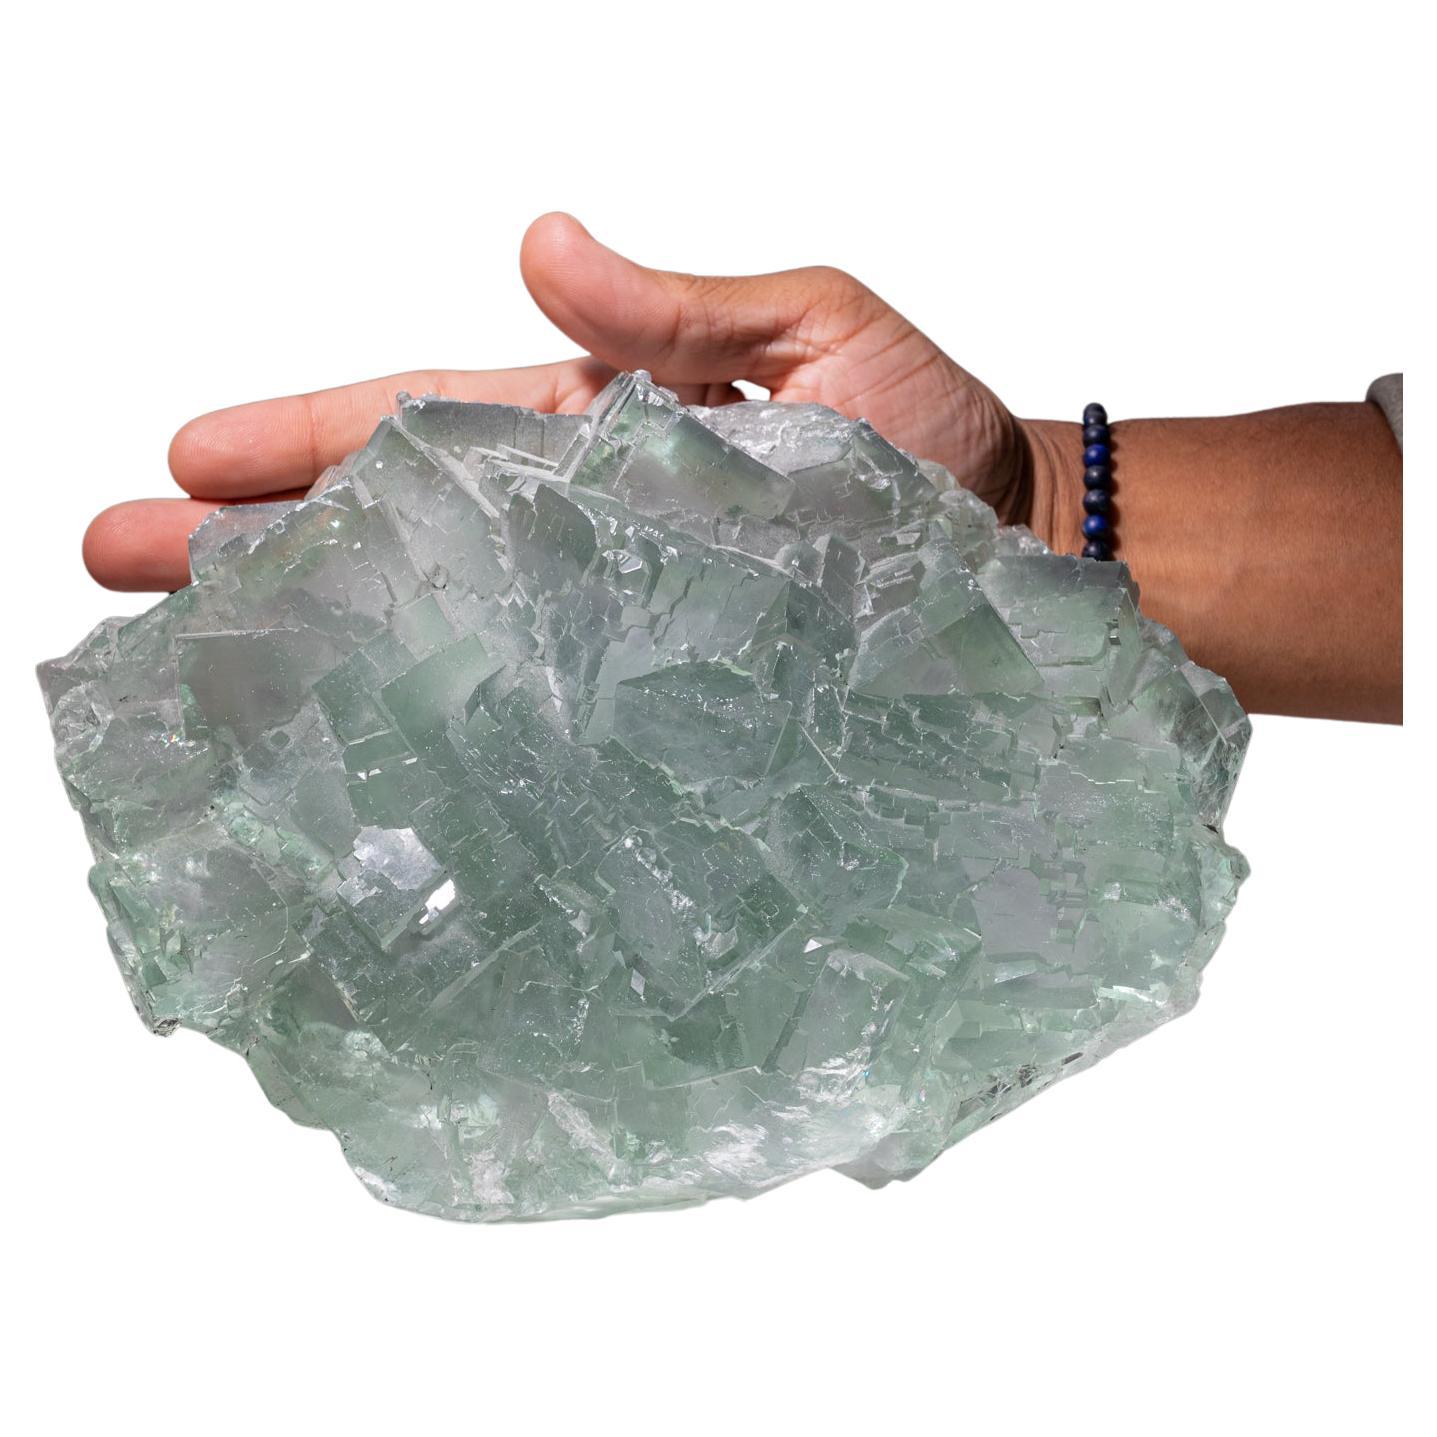 From Yaogangxian Mine, Nanling Mountains, Hunan Province, China.

Transparent cluster of light green fluorite crystals with glassy crystal surfaces gem green core with blue phantom zoning around the crystal terminations.

Weight: 9 lbs,